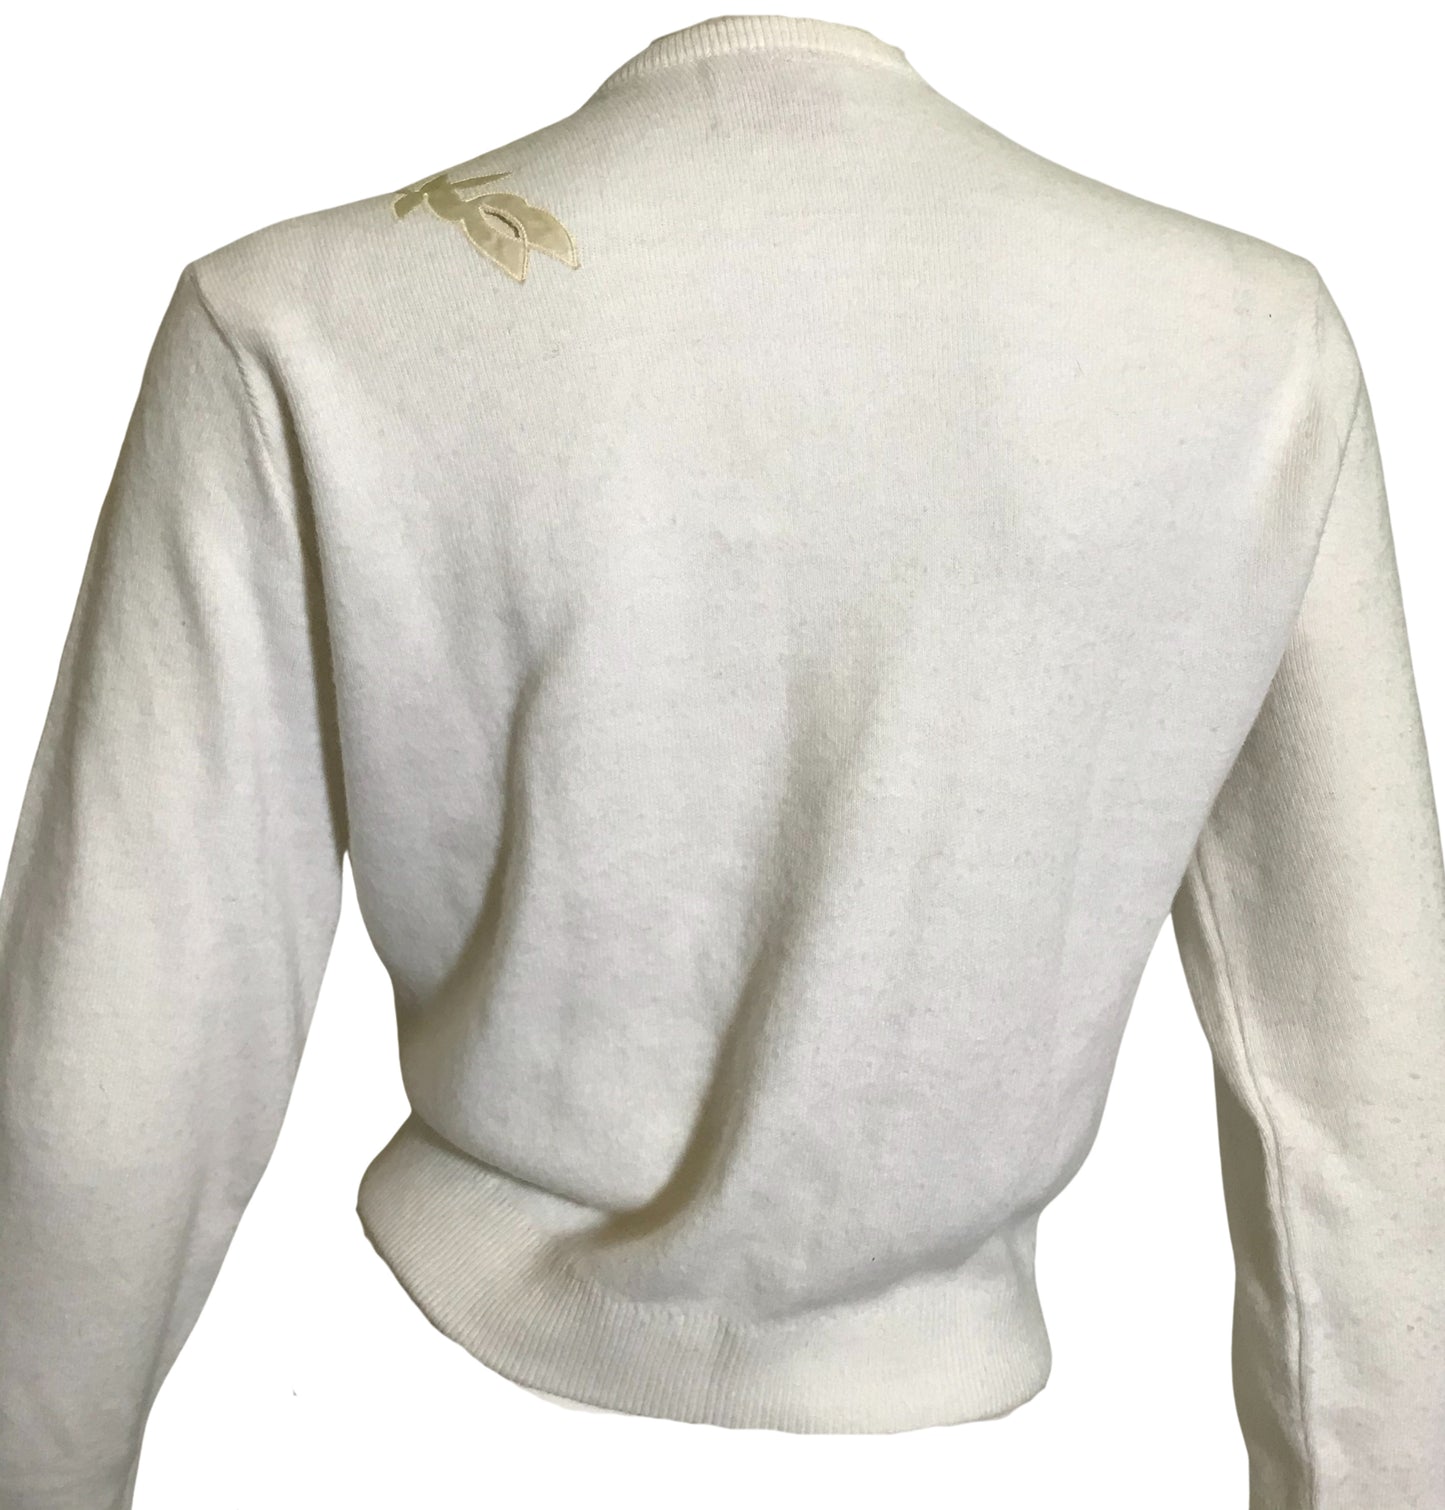 Satin Cutwork Floral Accented Ivory Cardigan Sweater circa 1950s